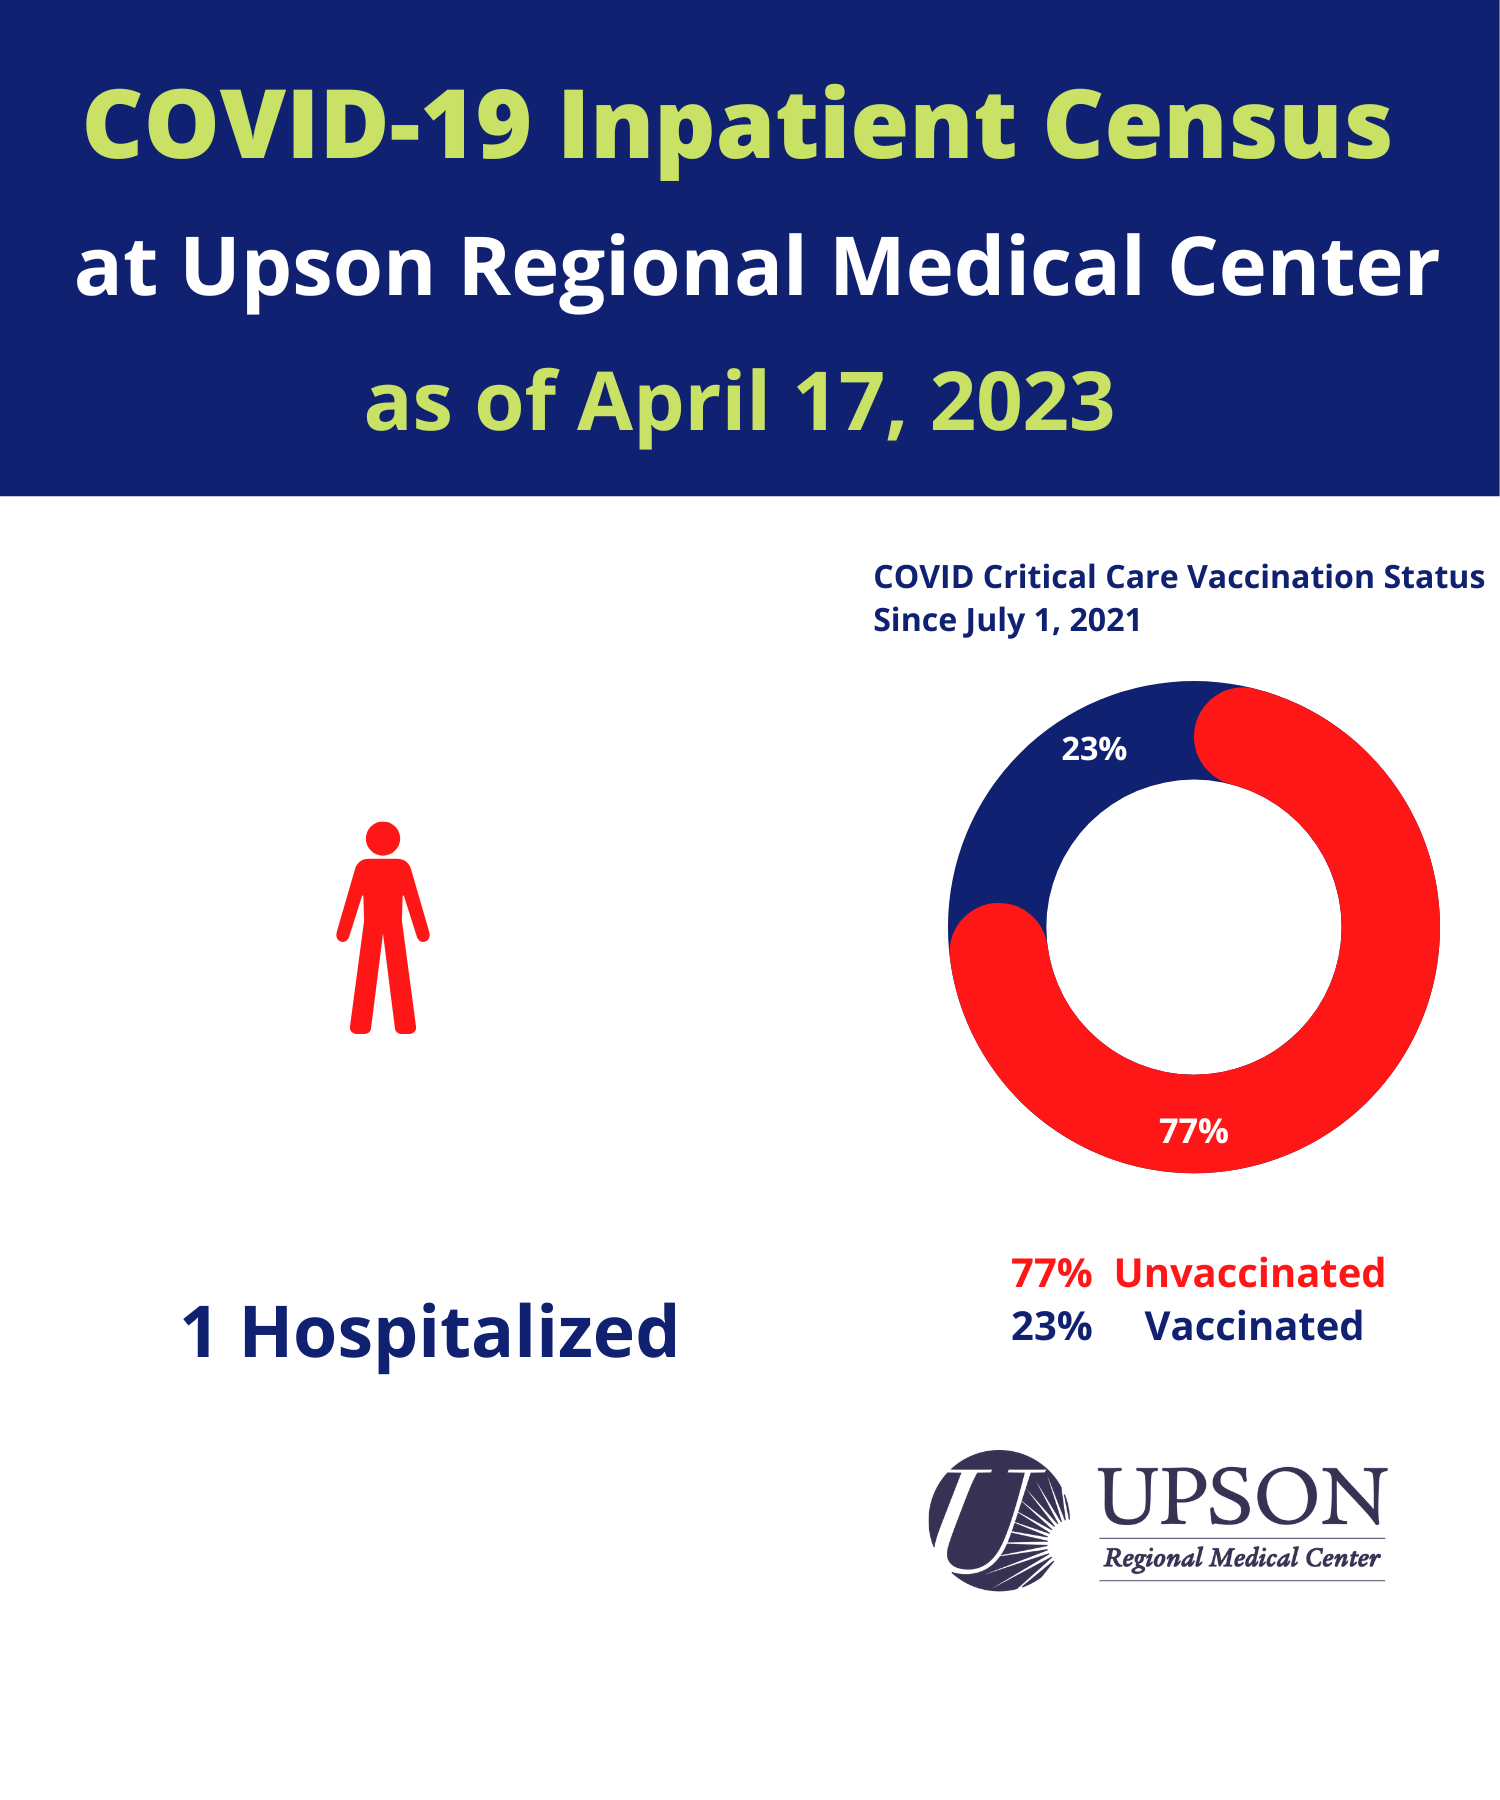 Photo for URMC COVID-19 inpatient status as of April 17, 2023.